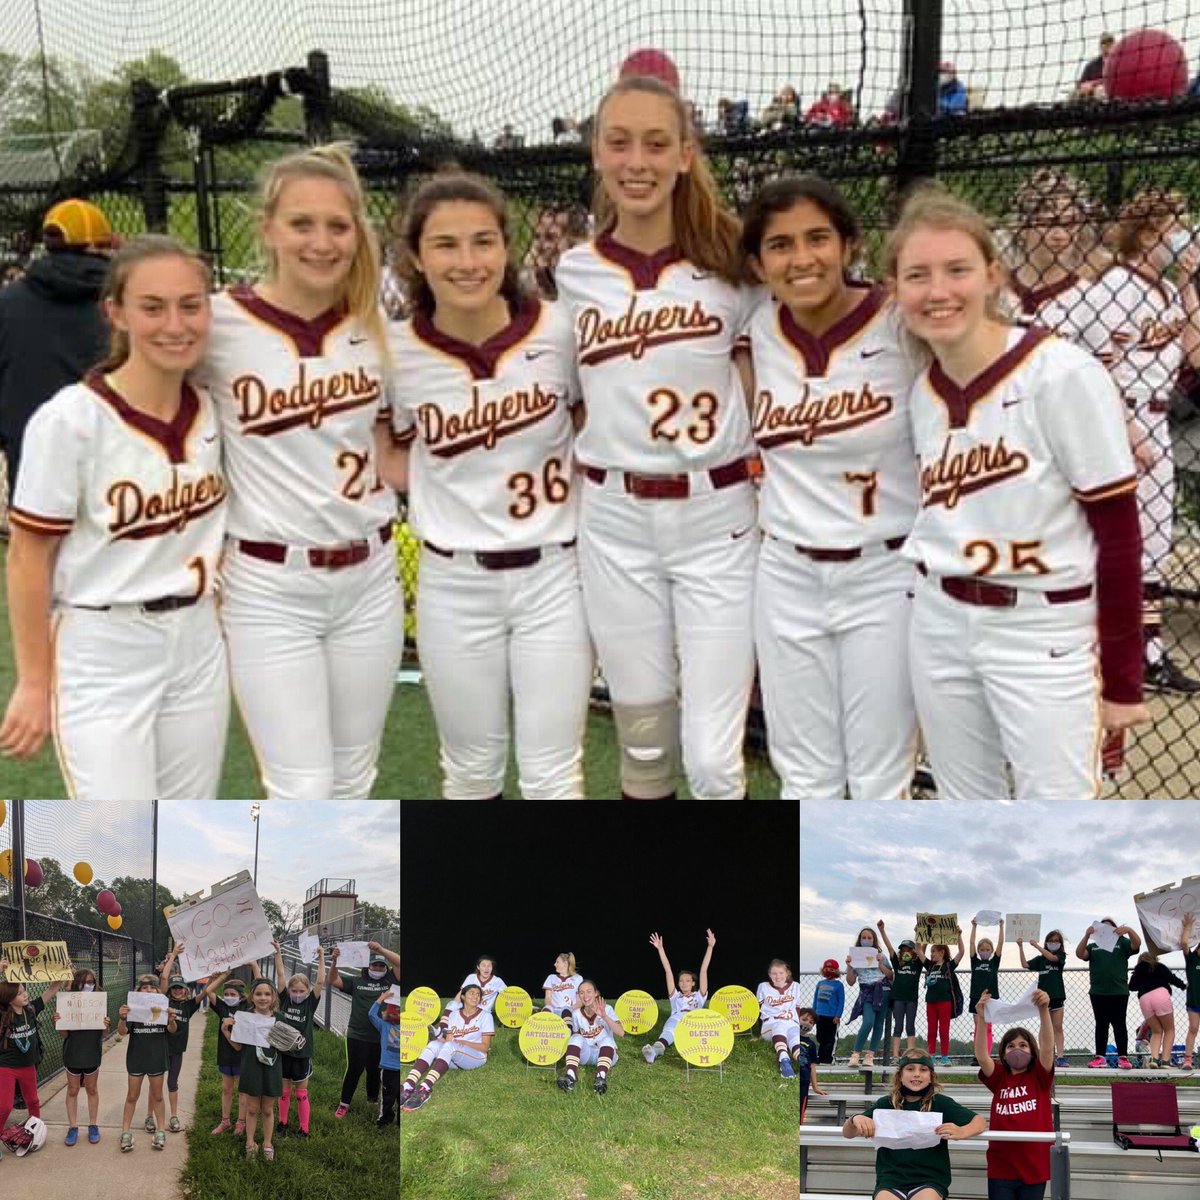 A great night to celebrate these seven seniors! Thank you girls! A shoutout to our future dodger softballers in the stands cheering us on tonight!!! #dodgers #greatdaytobeadodger @DodgerAthletics